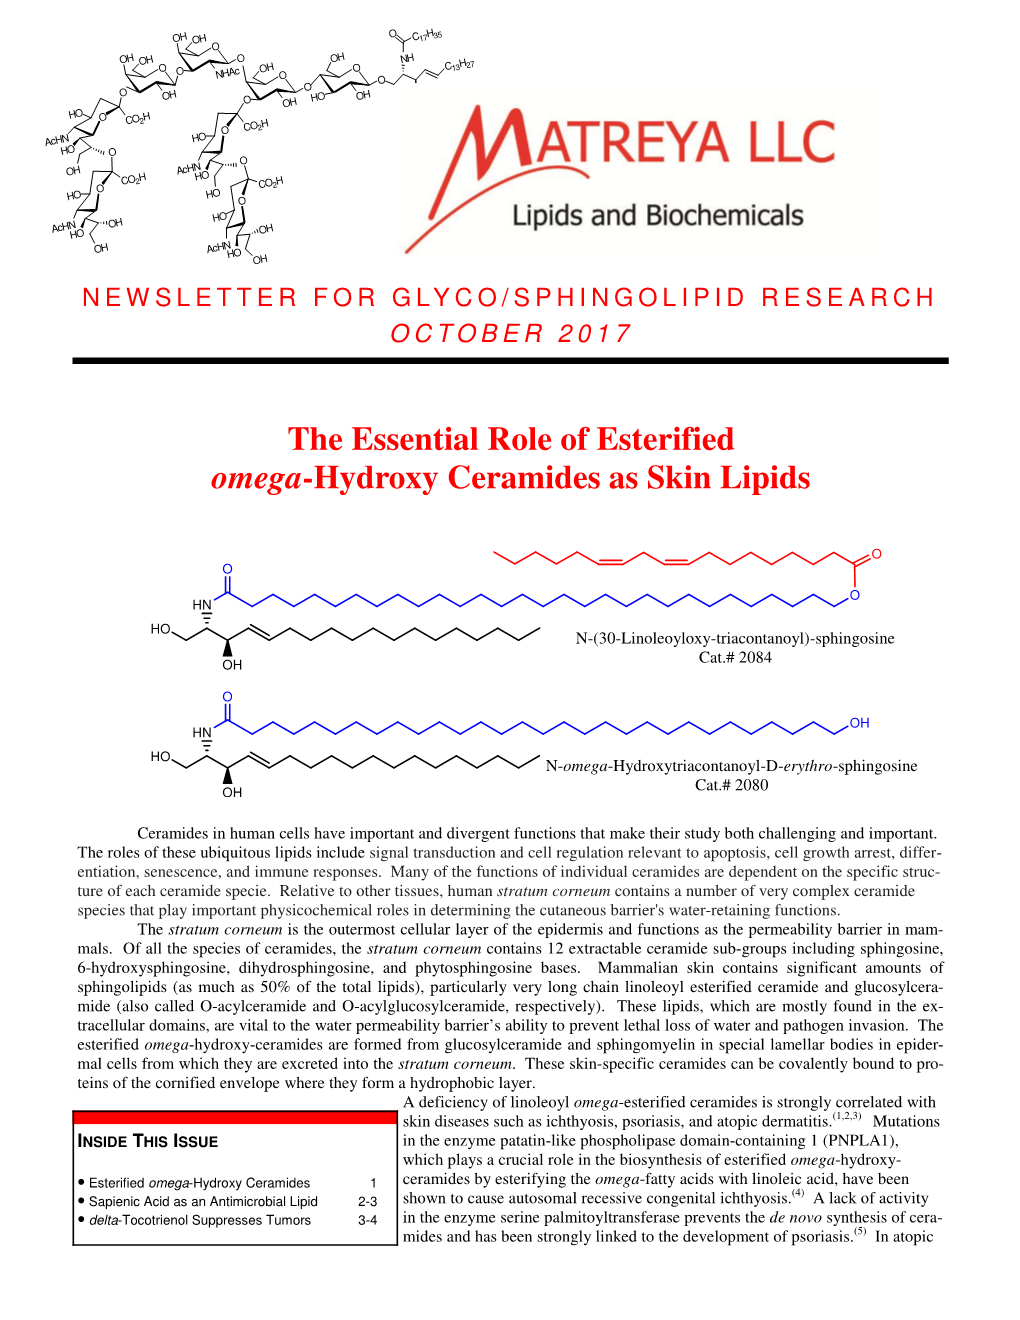 The Essential Role of Esterified Omega-Hydroxy Ceramides As Skin Lipids